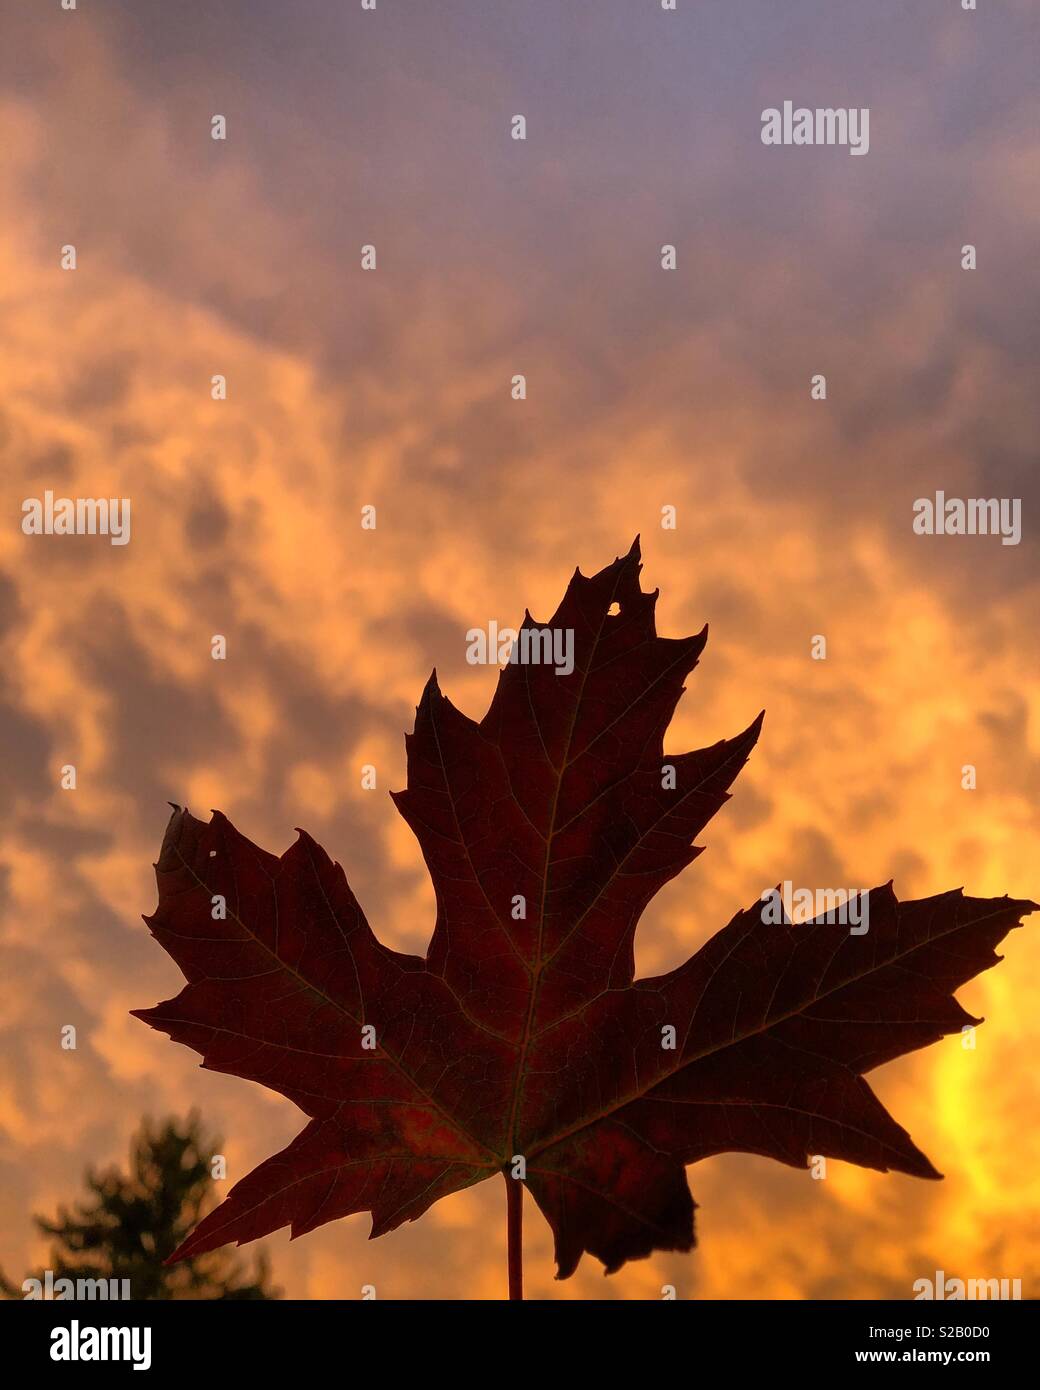 Red maple leaf against dramatic sunset Stock Photo